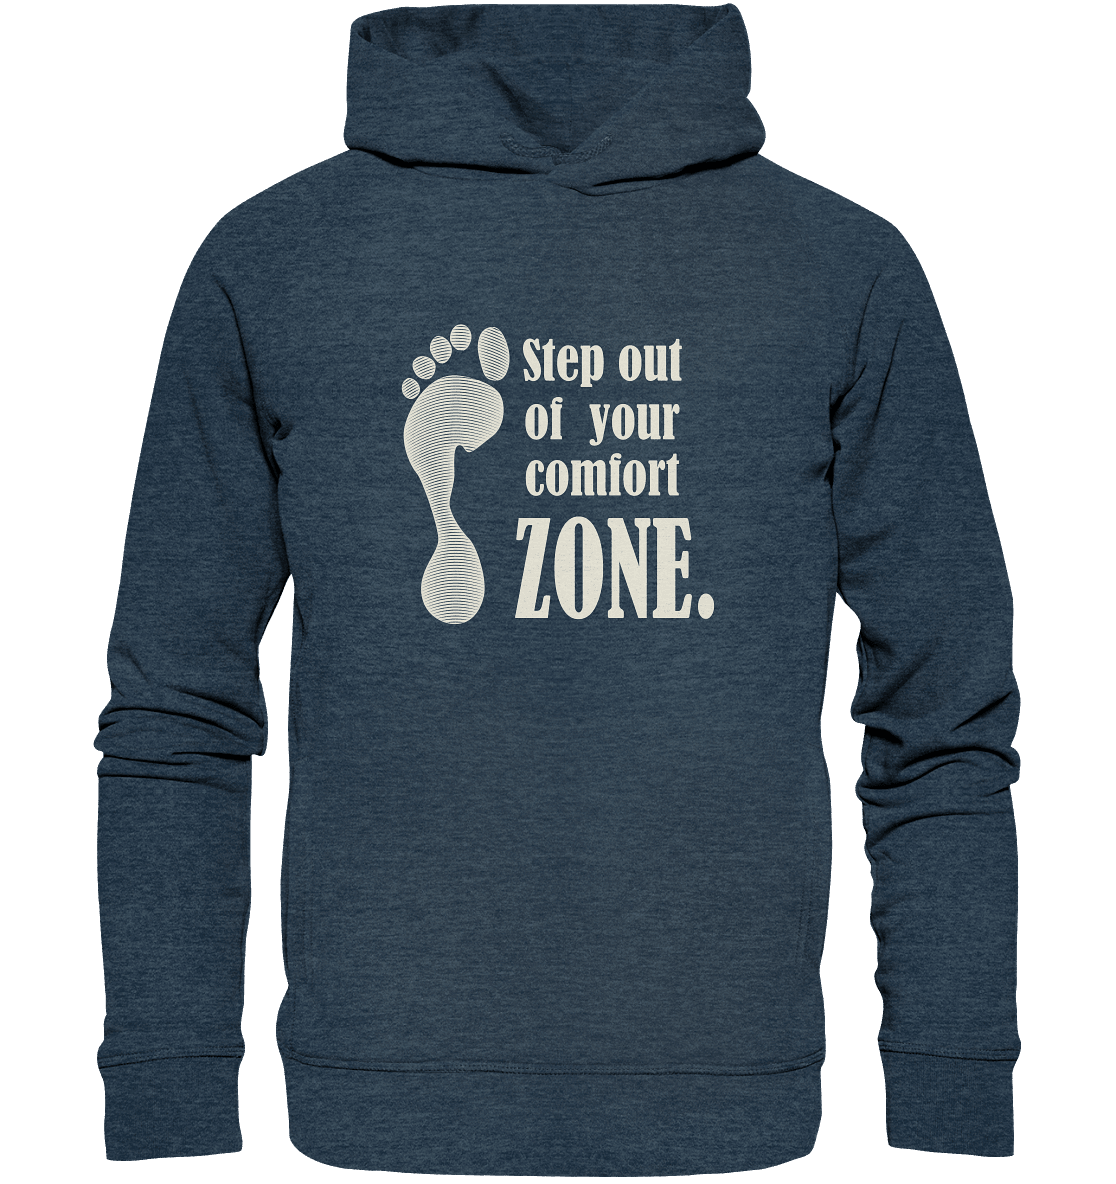 step out of your comfort zone - Organic Fashion Hoodie